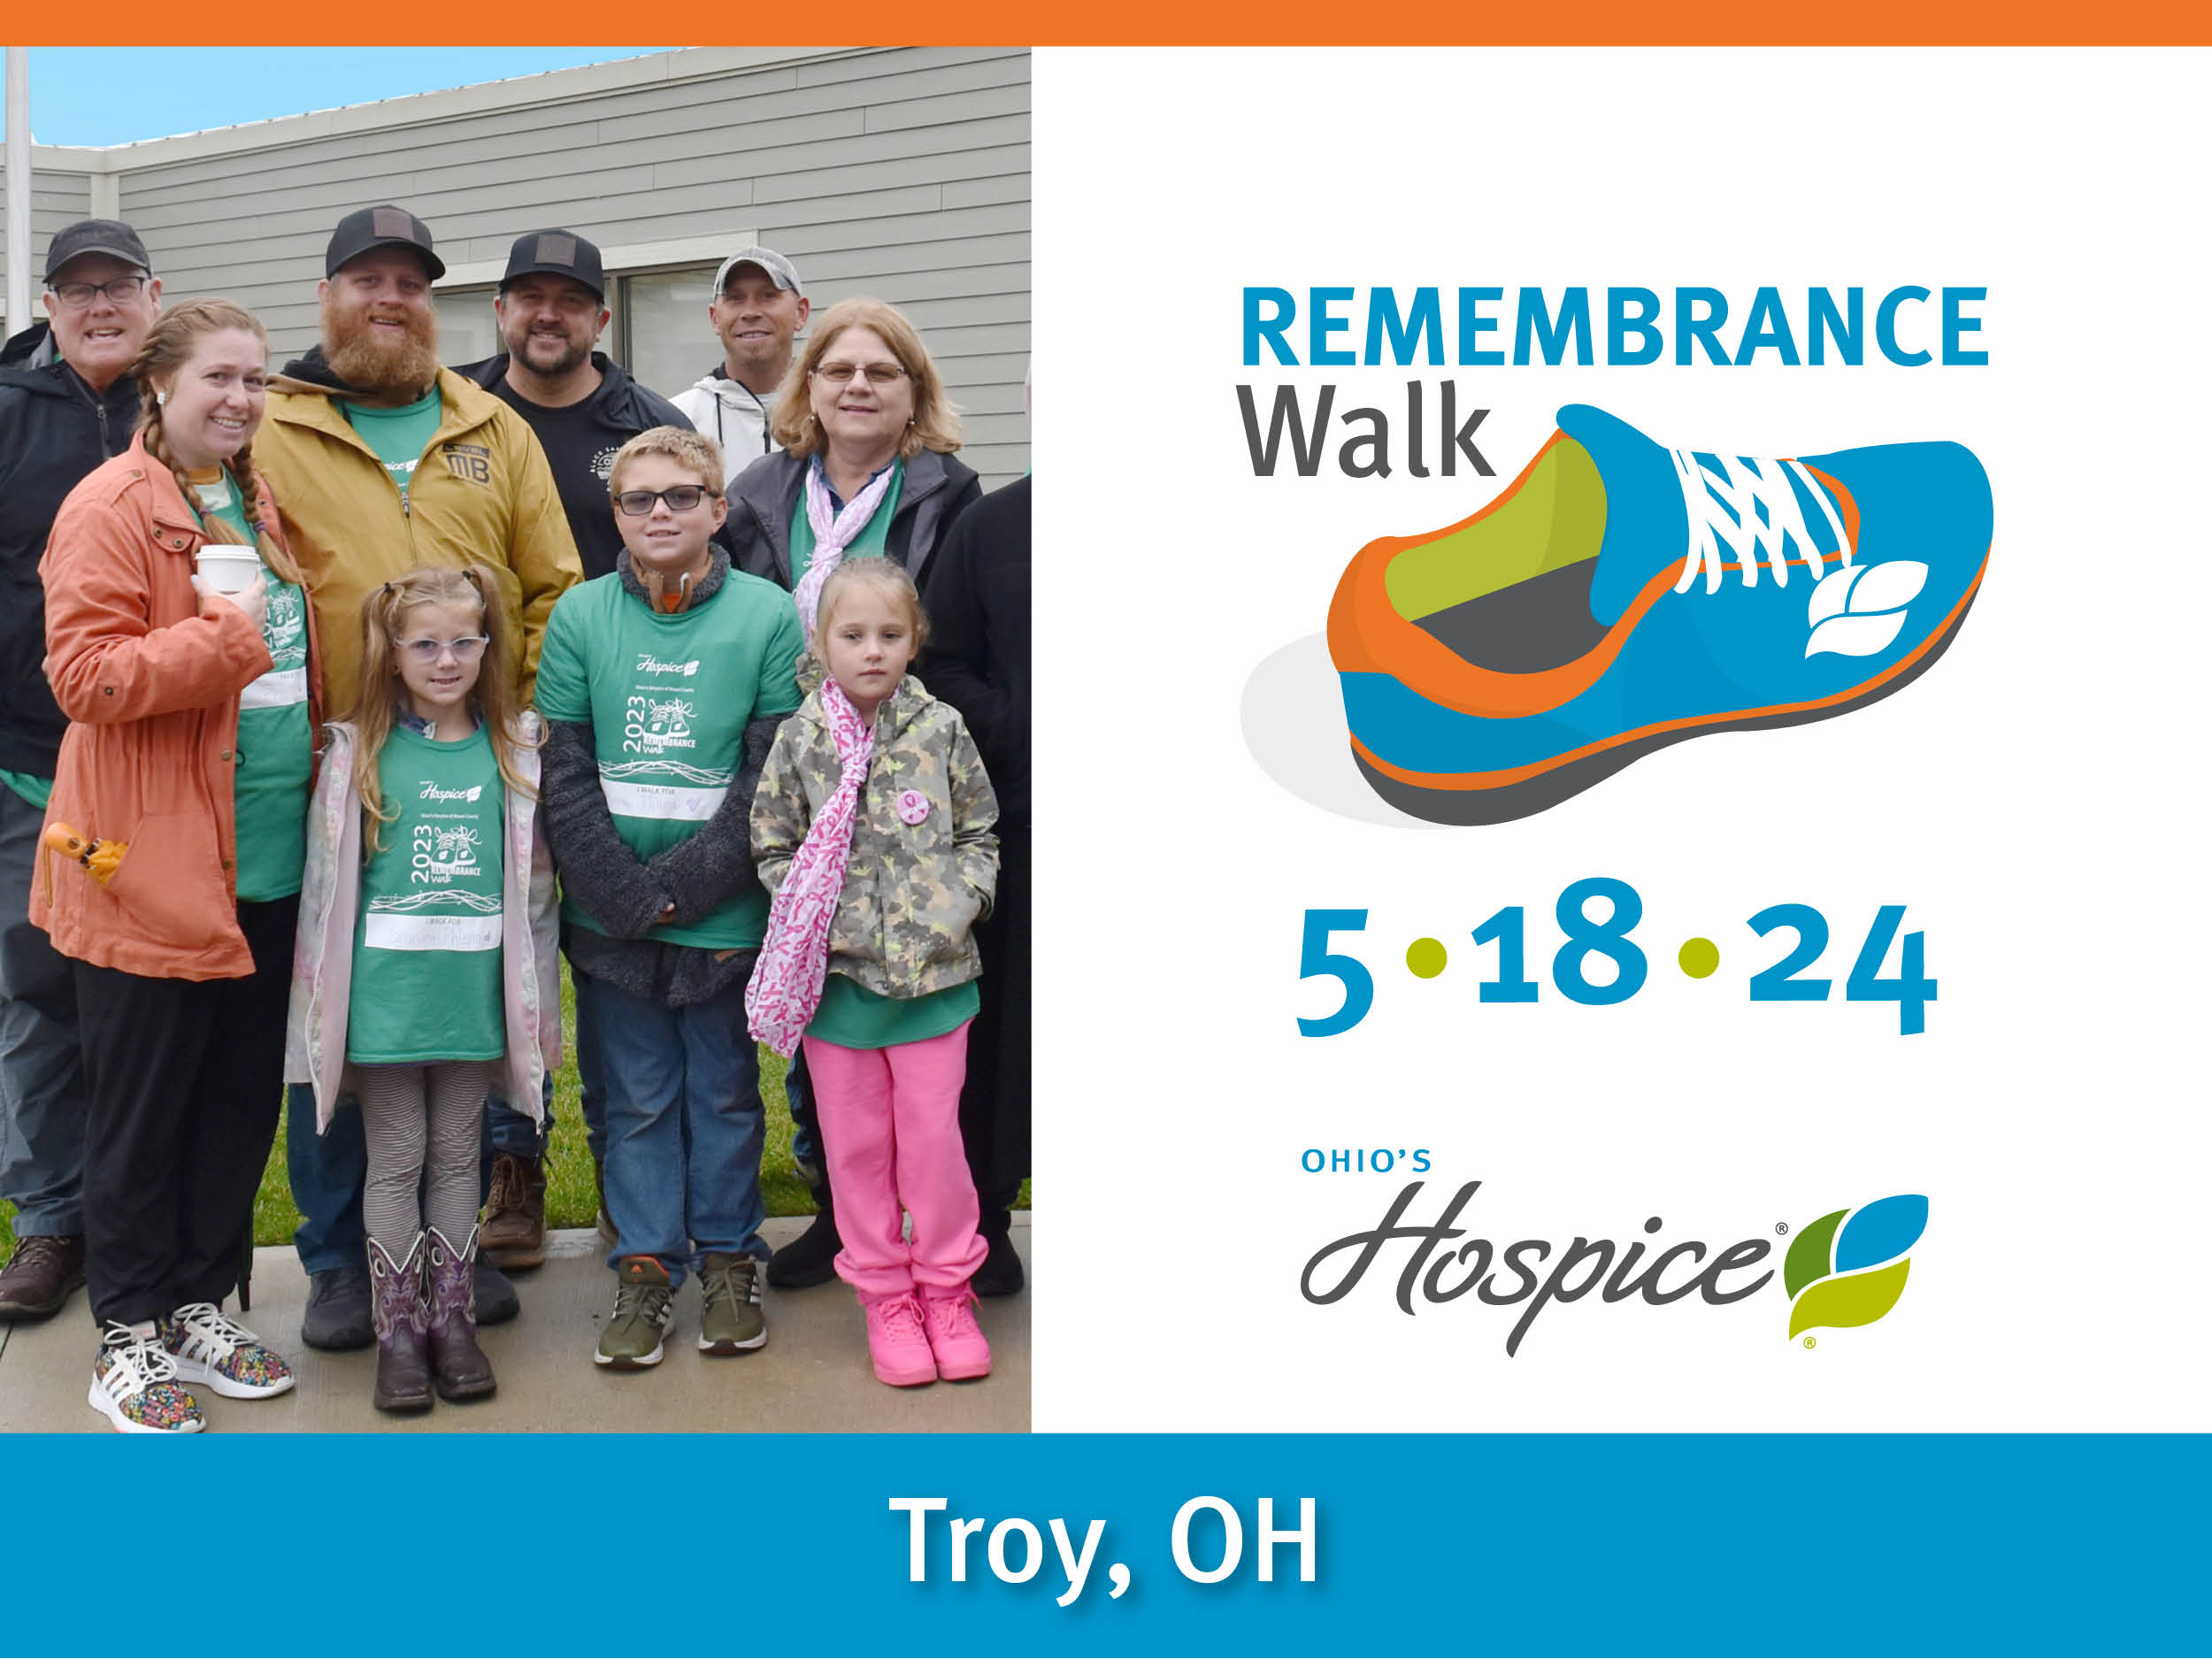 Remembrance Walk 5.18.24 Troy, OH